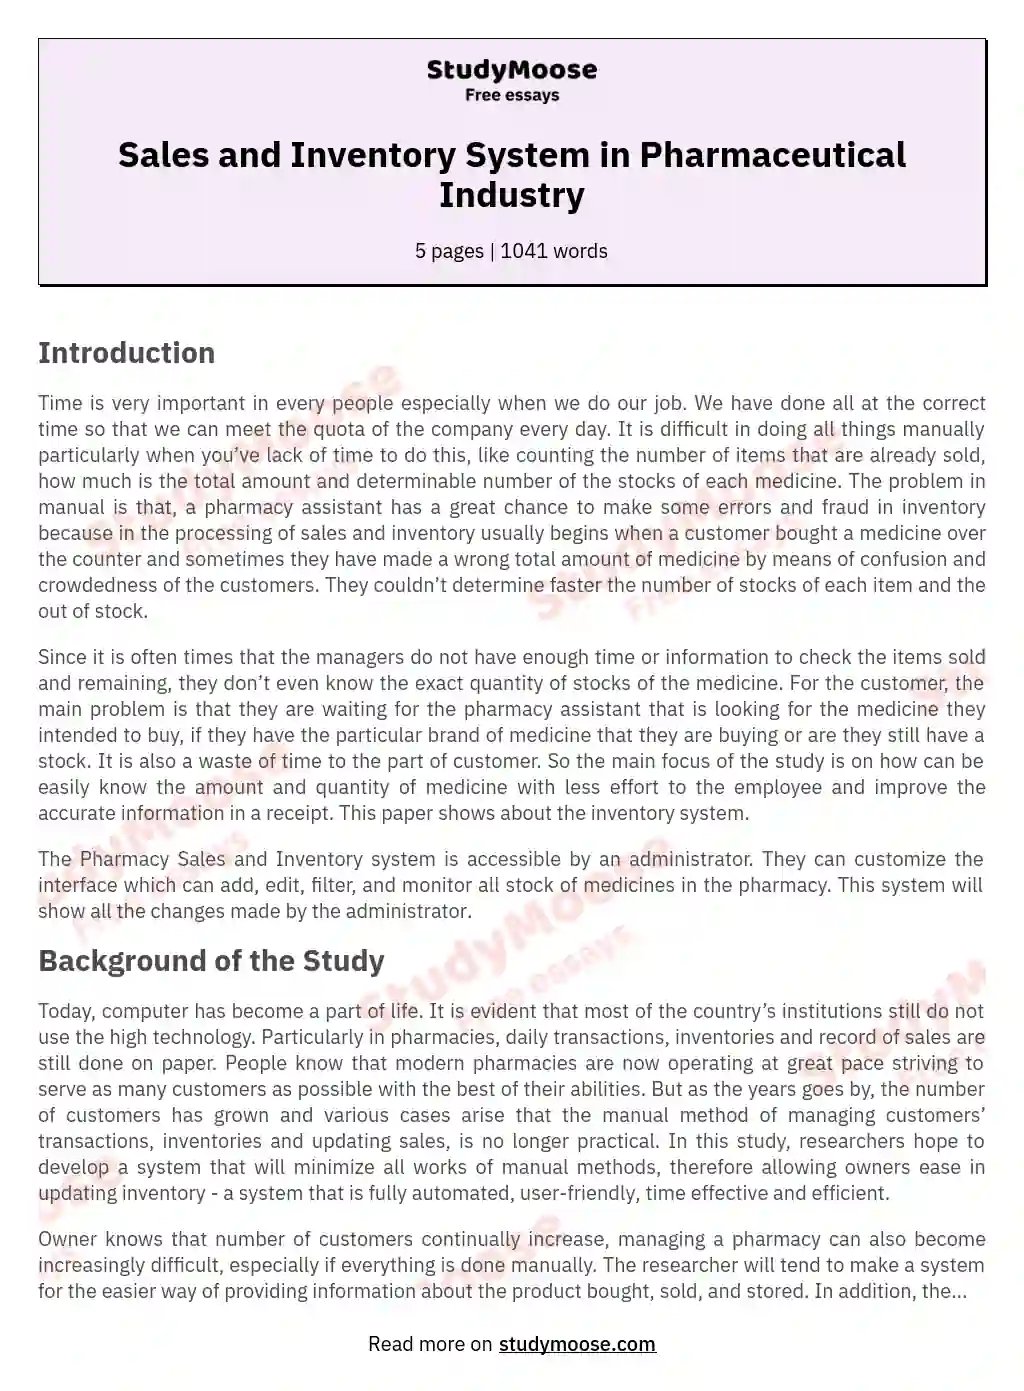 Sales and Inventory System in Pharmaceutical Industry essay